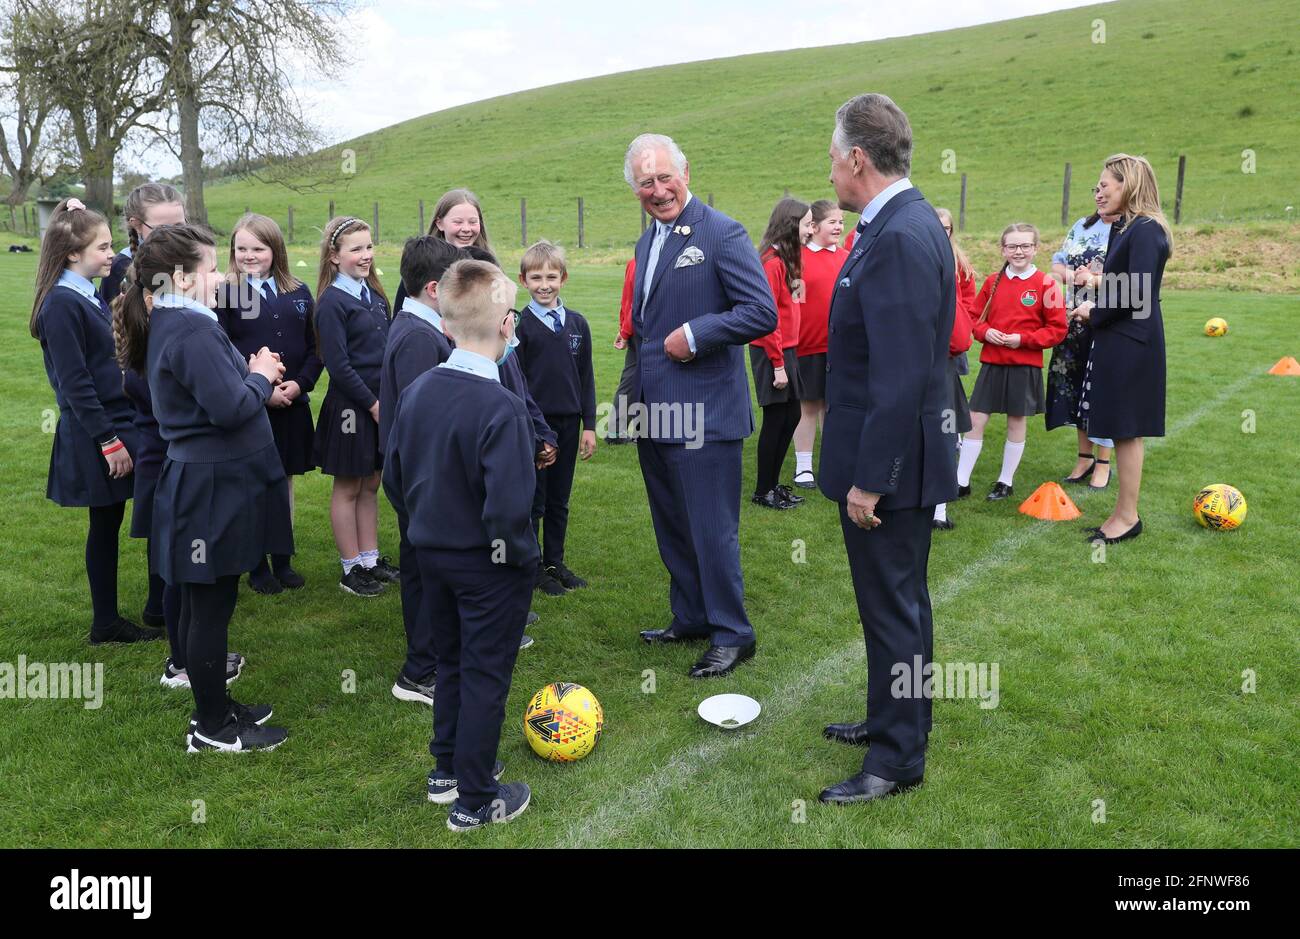 Britain's Prince Charles with Lord Caledon meet children at Caledon Rovers FC pitch, during his visit to Caledon, Northern Ireland May 19, 2021. Brian Lawless/PA Wire/Pool via REUTERS Stock Photo